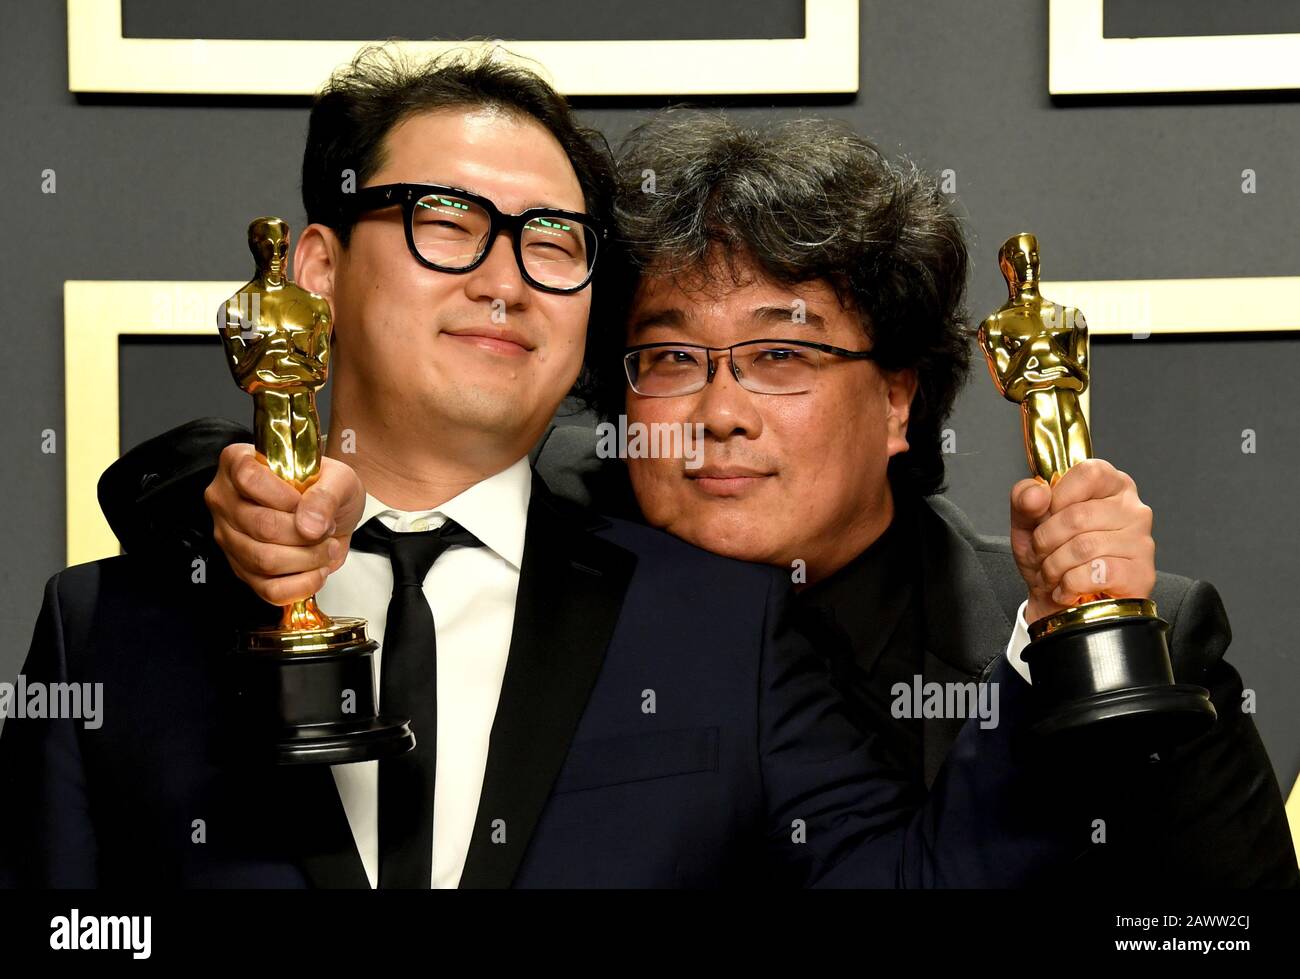 Han Jin-won and Bong their Oscars for Best Original Screenplay, International Feature Film, Director, and Best Picture for Parasite in the press at the 92nd Academy Awards held